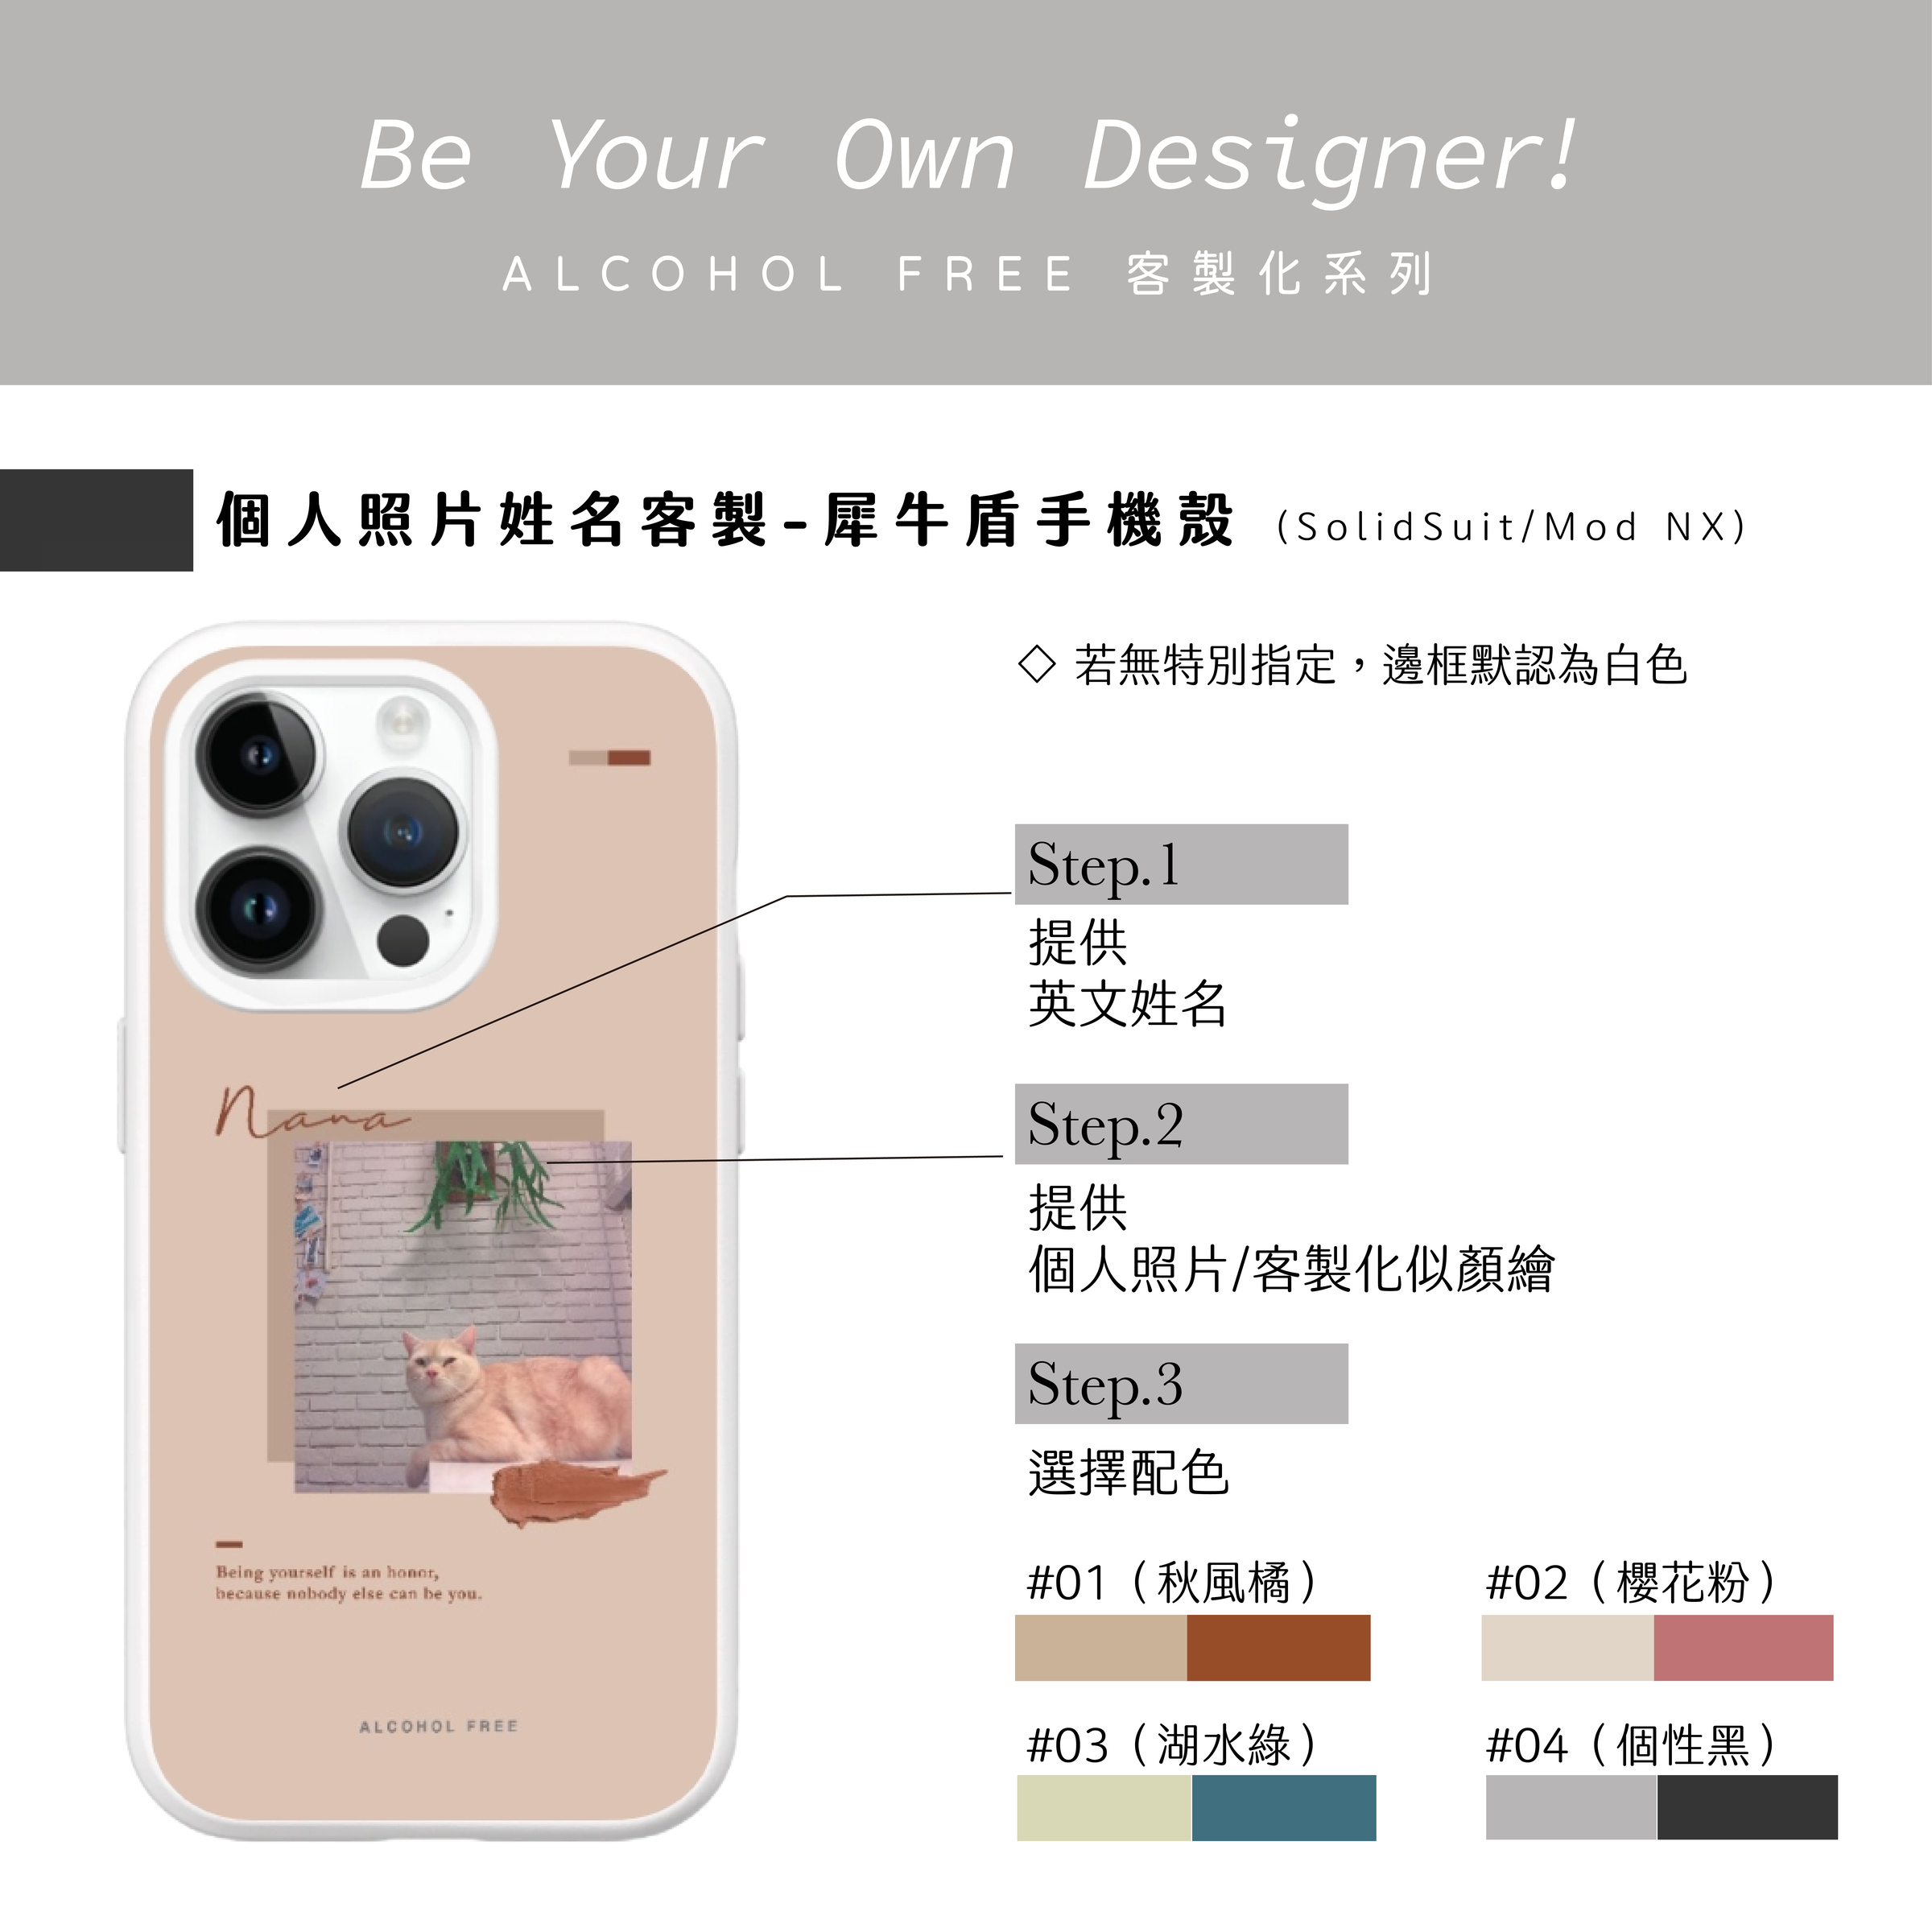 Be Your Own Designer